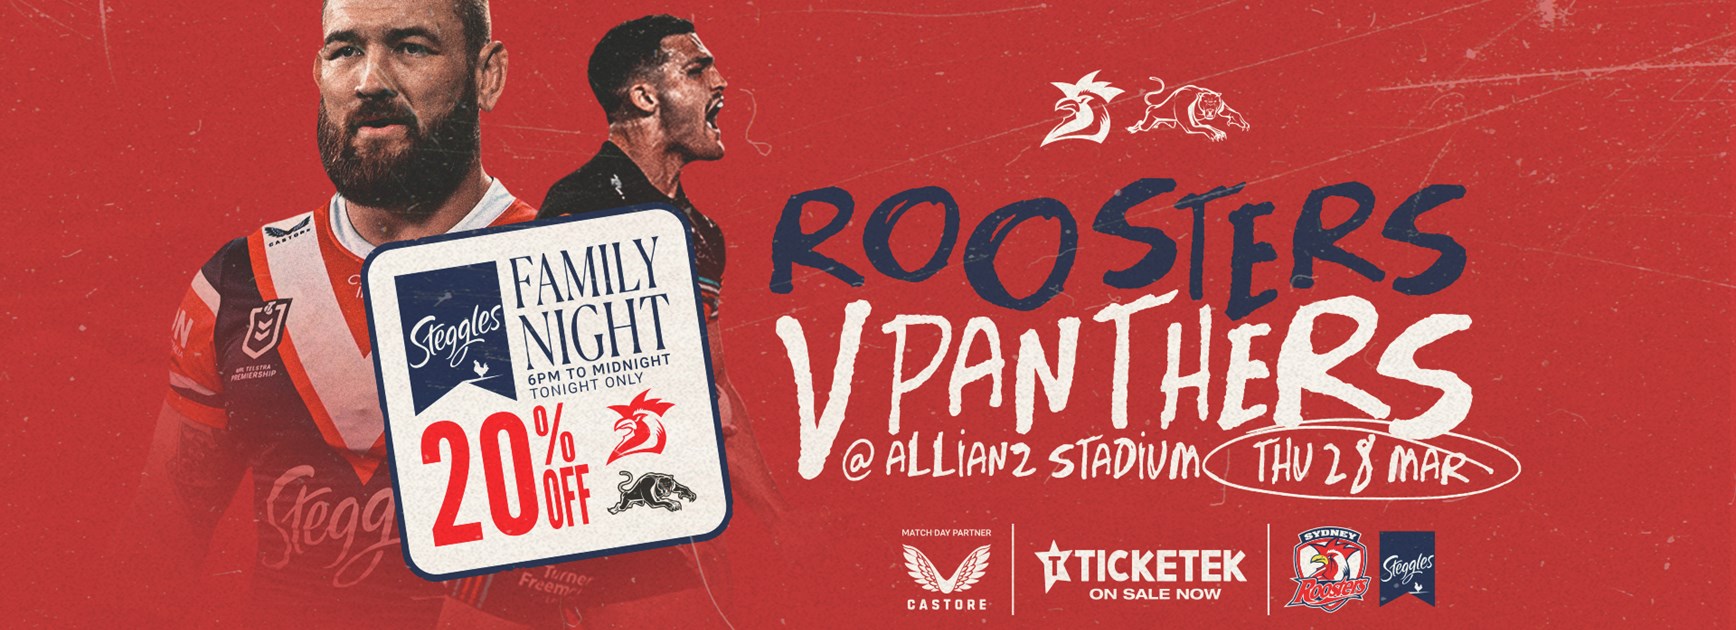 Get 20% Off All Round 4 Family Passes with Steggles Family Night!